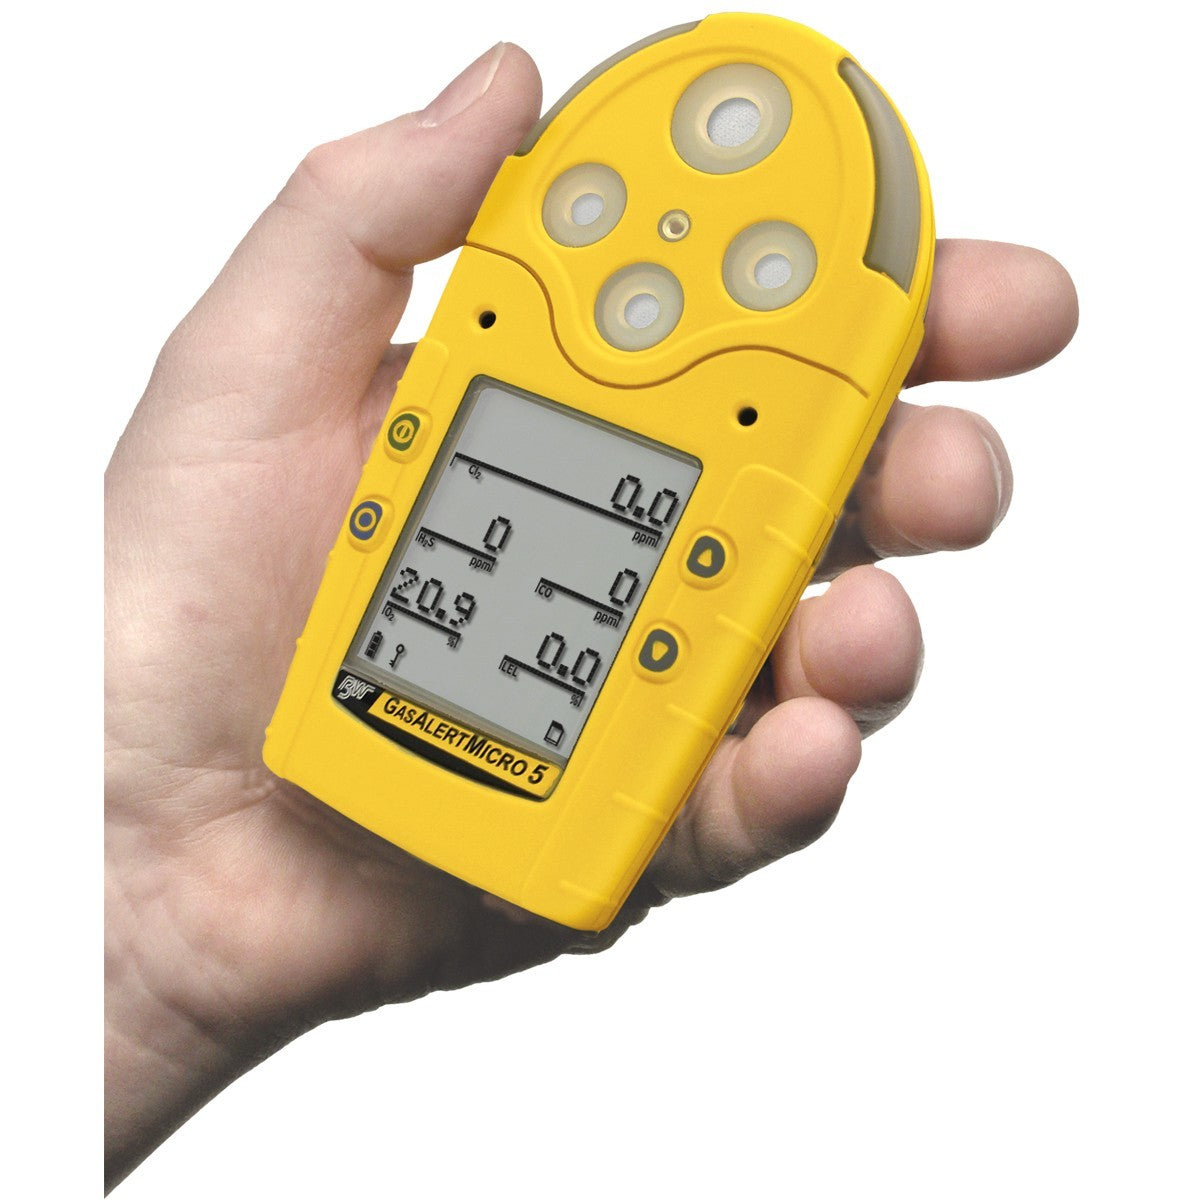 BW Technologies by Honeywell GasAlertMicro 5 Portable Hydrogen Sulfide, Carbon Monoxide, Oxygen And Combustible Gas Detector-eSafety Supplies, Inc